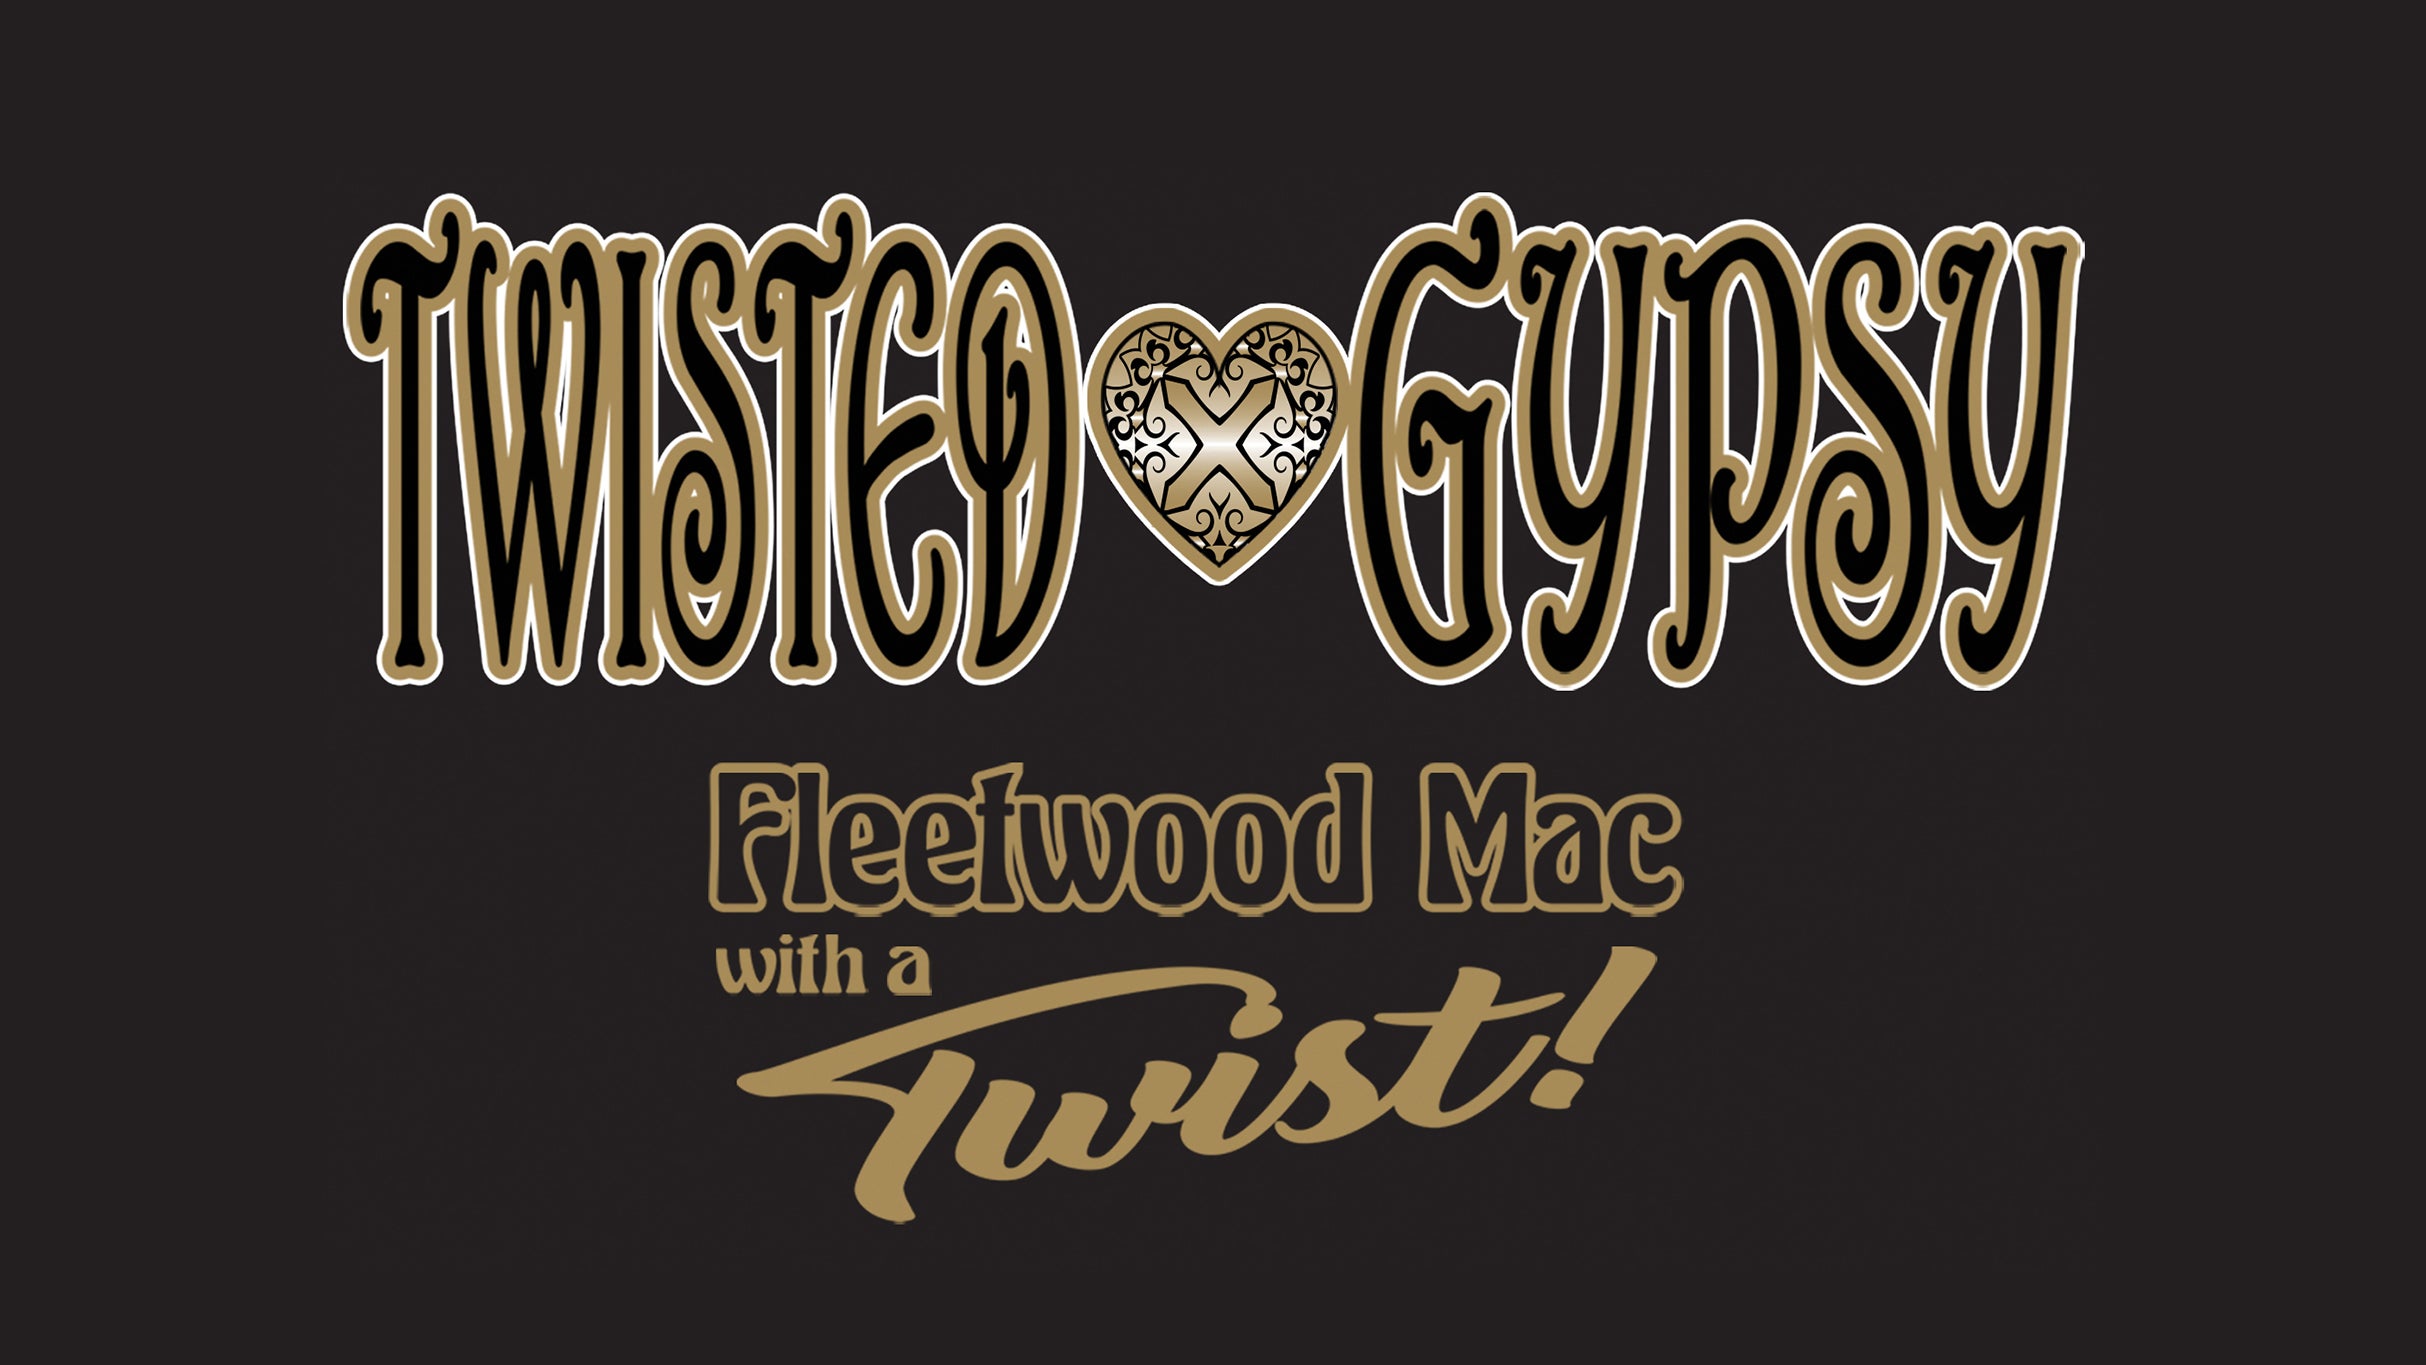 Fleetwood Mac Reimagined featuring Twisted Gypsy